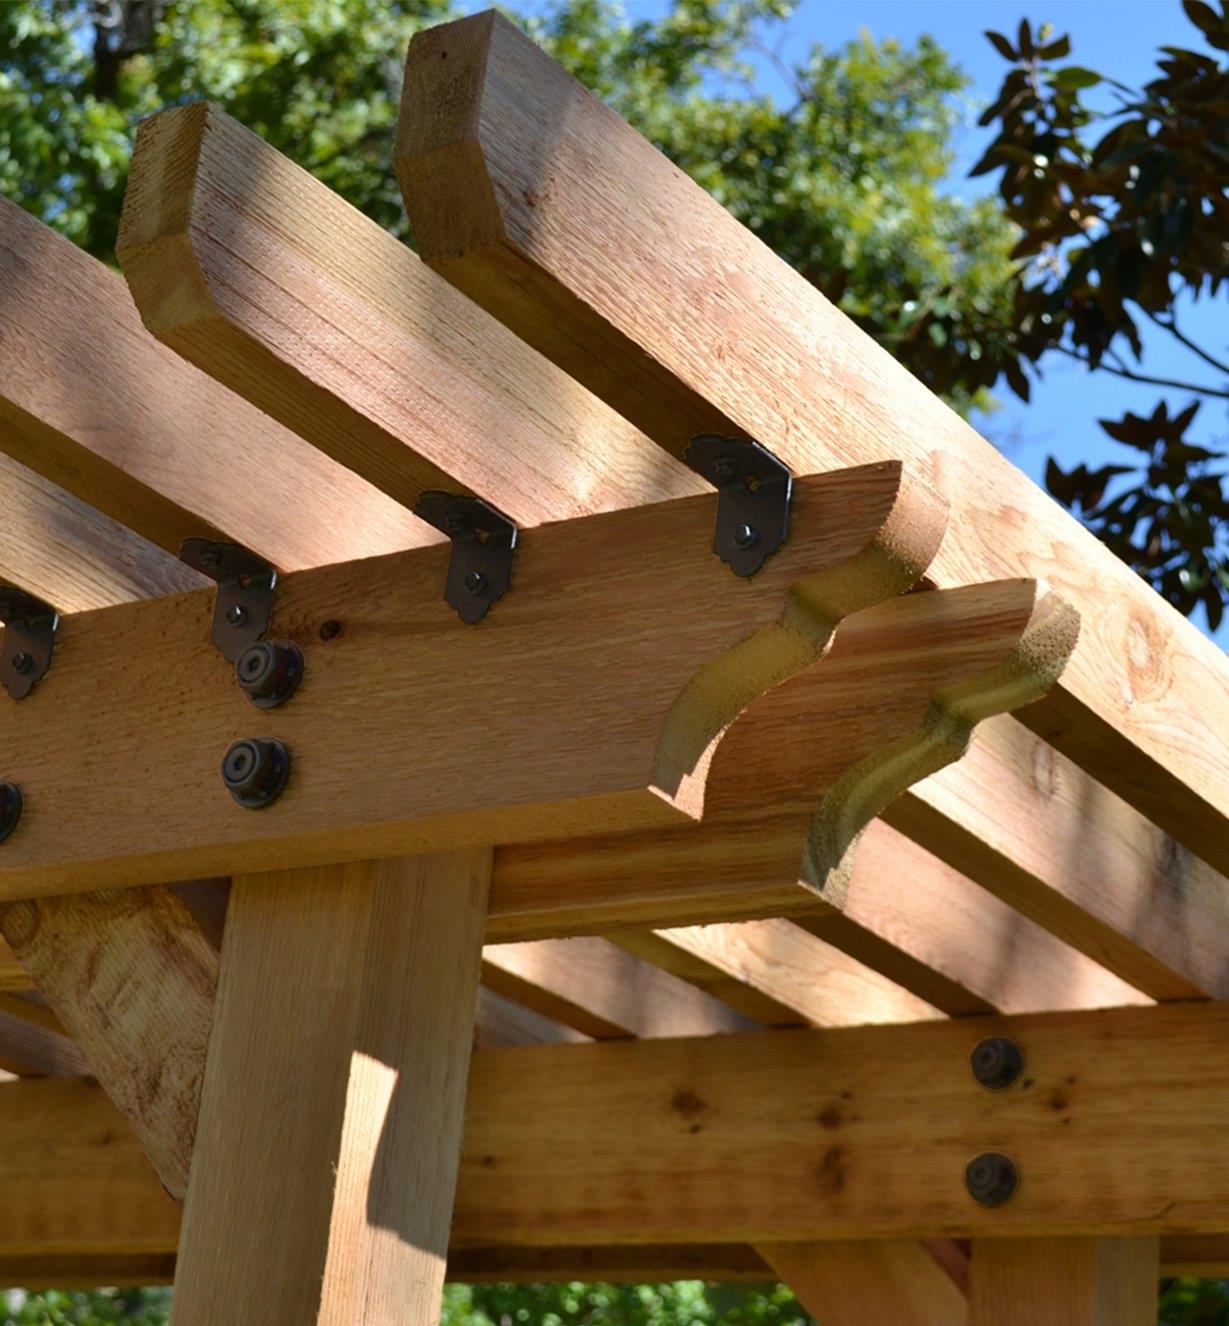 Ozco 2" Rafter Clips installed on a pergola